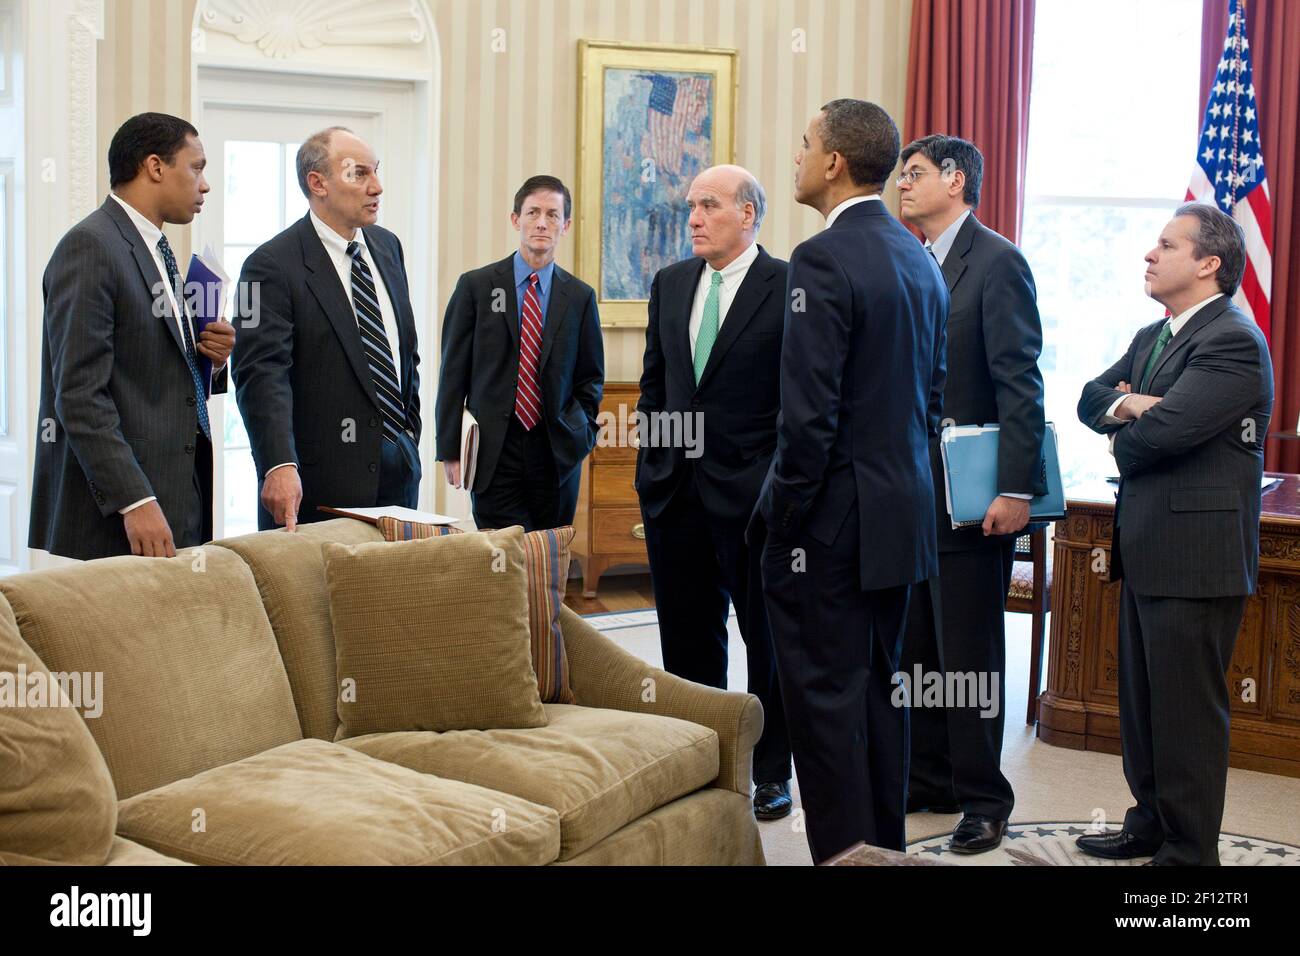 President Barack Obama talks with advisors in the Oval Office April 7 2011. Meeting with the President from left are: Rob Nabors; Phil Schiliro; Bruce Reed; Bill Daley; Jack Lew; and Gene Sperling. Stock Photo